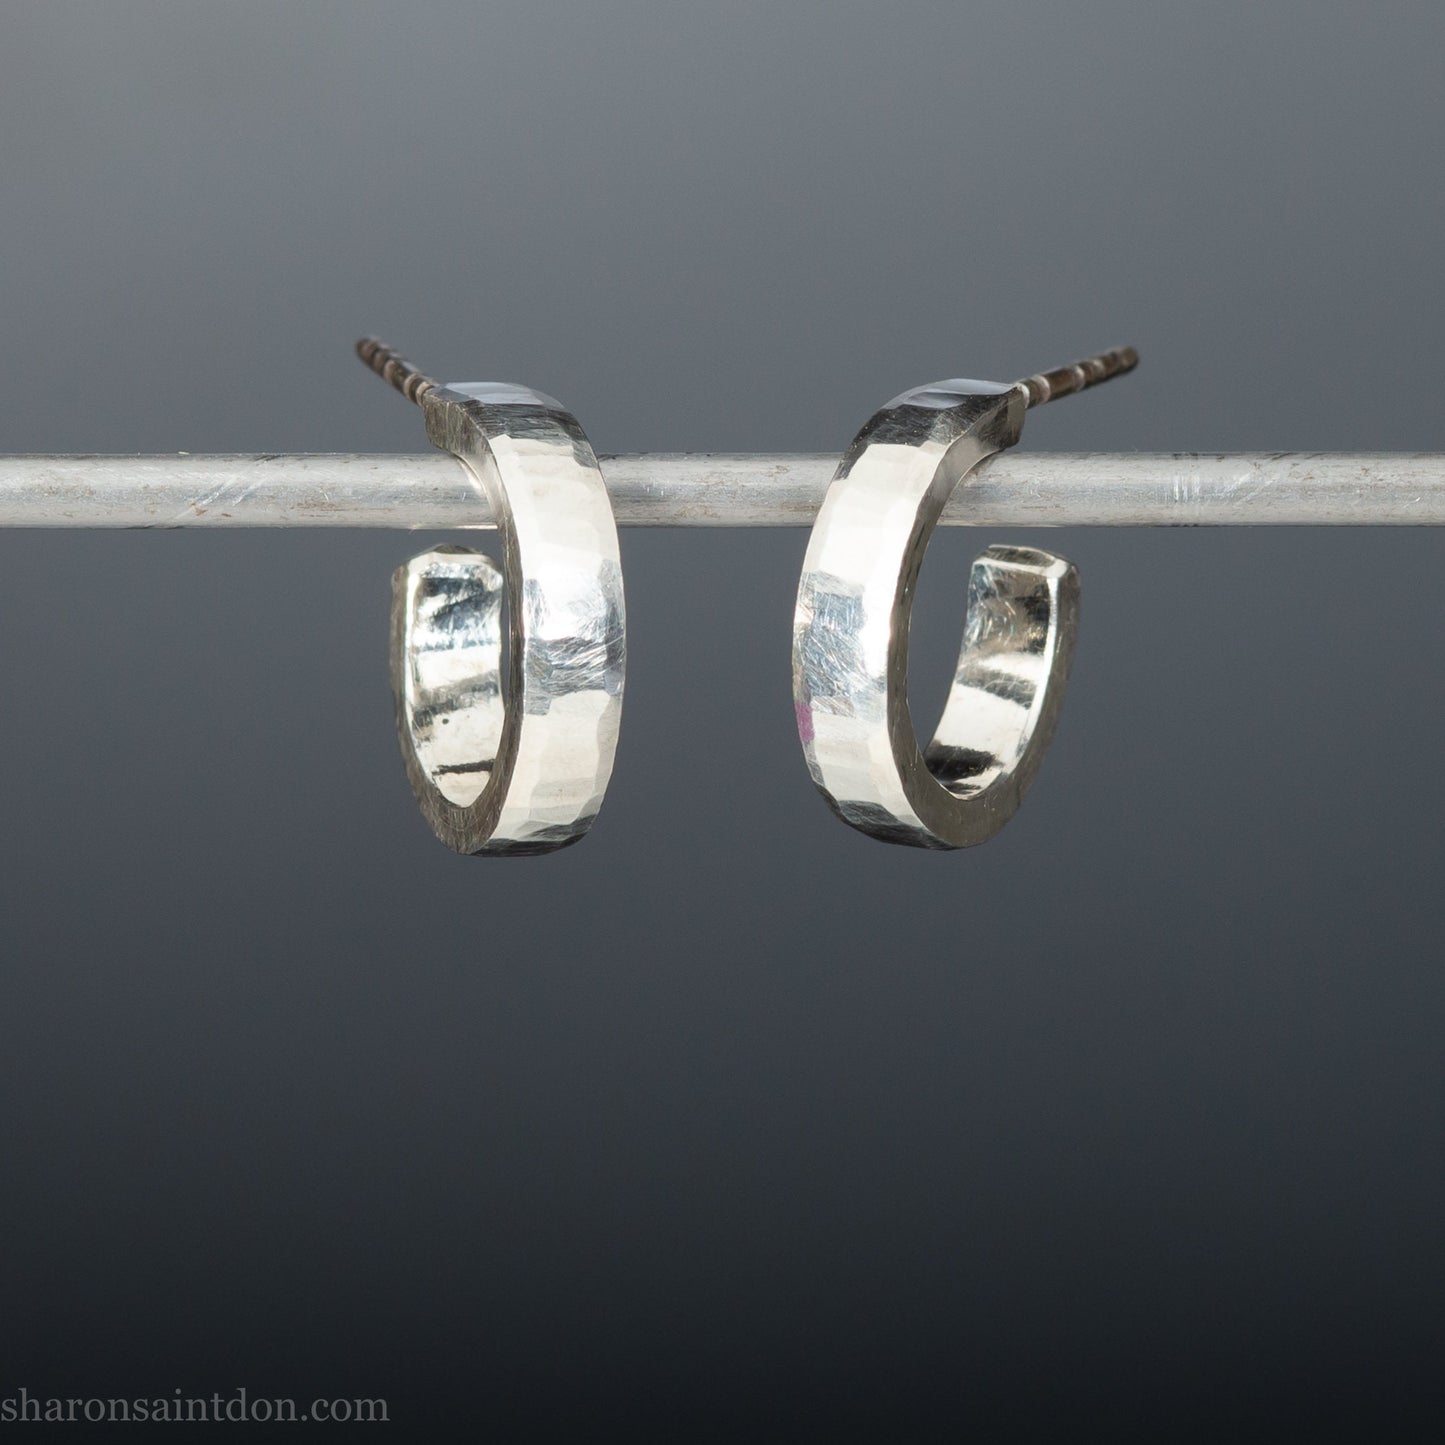 14mm x 3mm small sterling silver hoop earrings, handmade in North America by Sharon SaintDon. Hammered texture, solid silver with silver posts and backs for men or women, unisex.